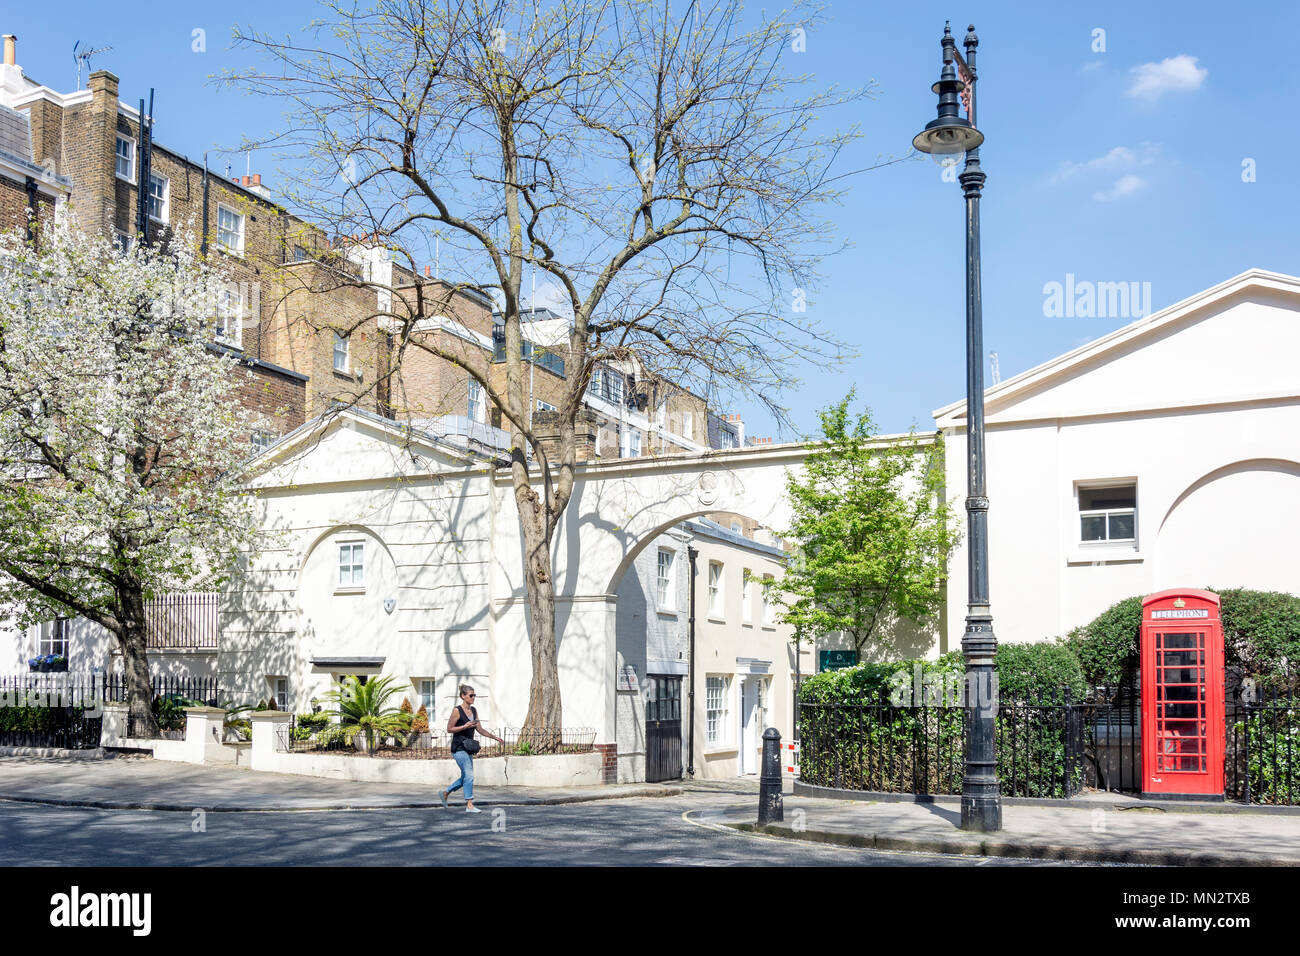 Entrance to Eccleston Mews from Belgrave Place, Belgravia, City of Westminster, Greater London, England, United Kingdom Stock Photo